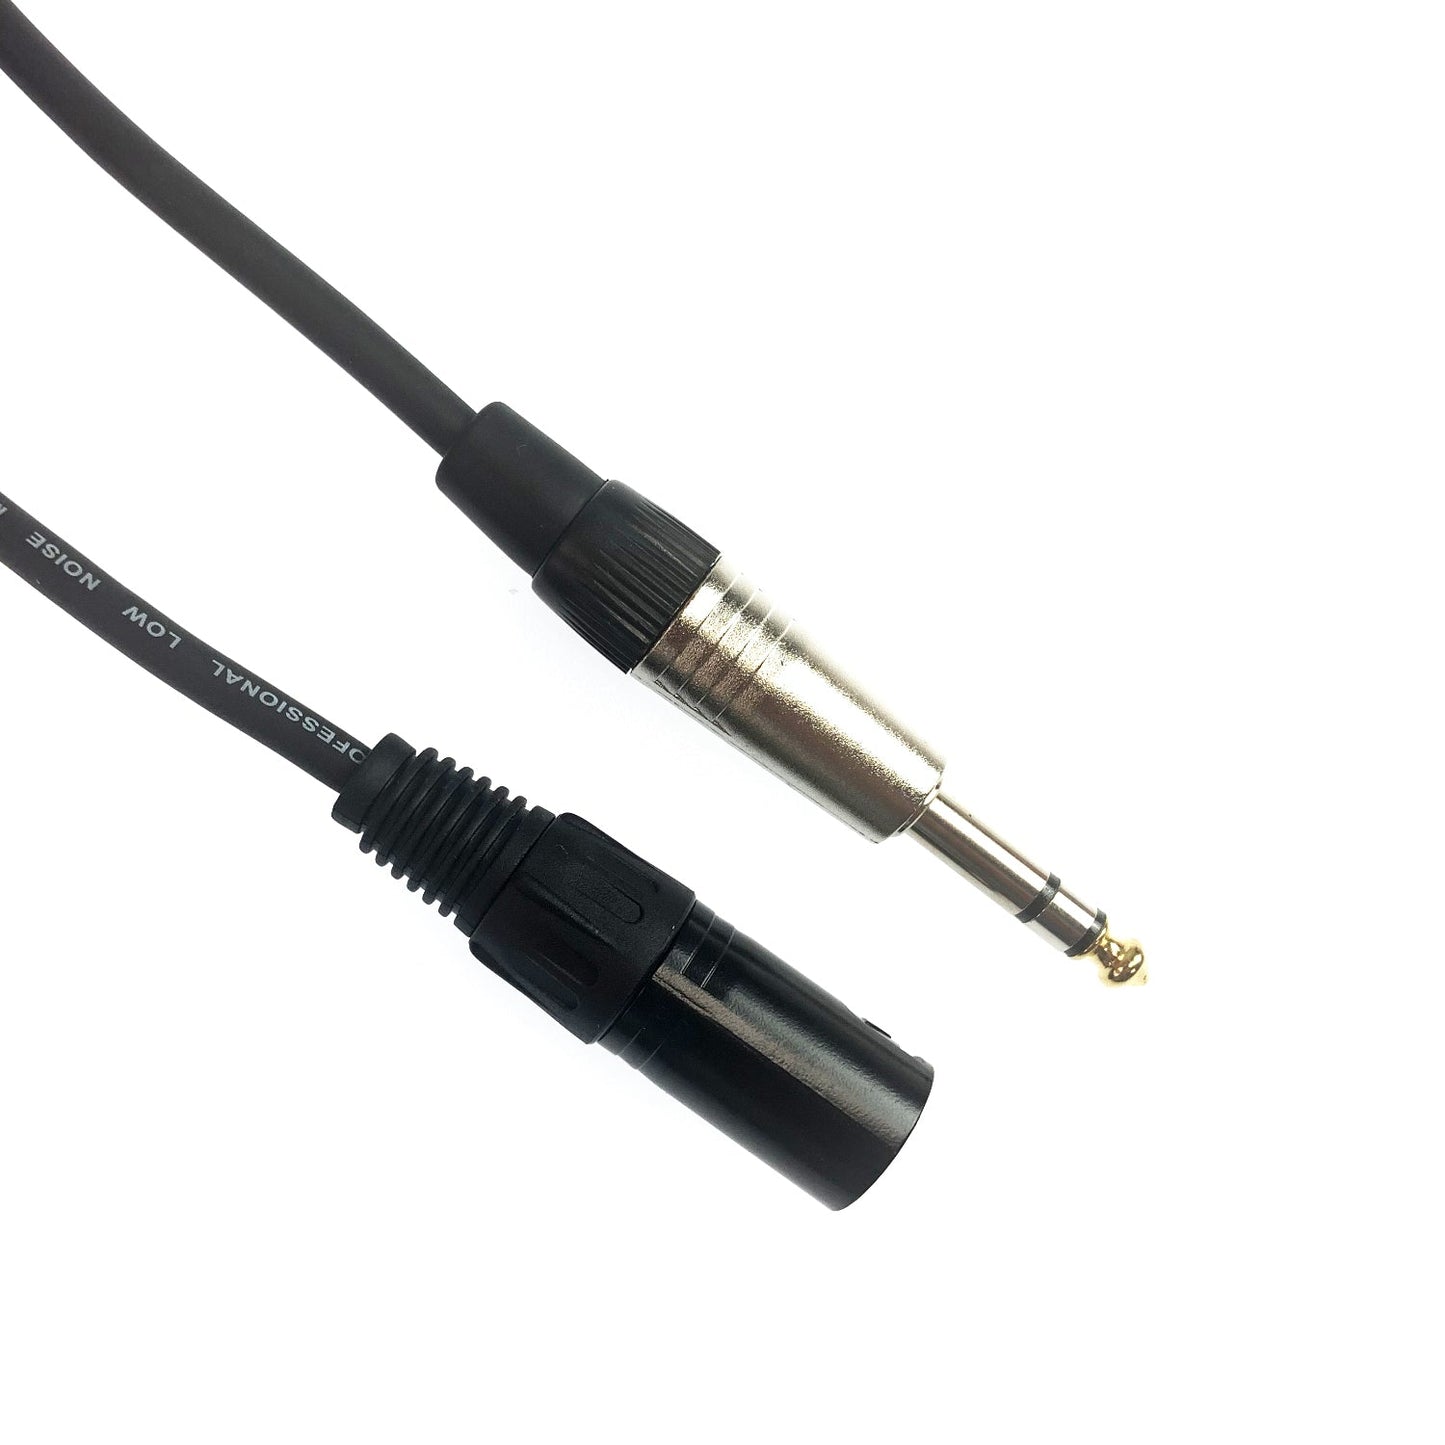 ACL 6.35mm 1/4 inch TRS Jack to XLR Male Balanced Interconnect Cord Patch Cable for Mixer Power Speaker Acoustic Guitar Studio Monitor